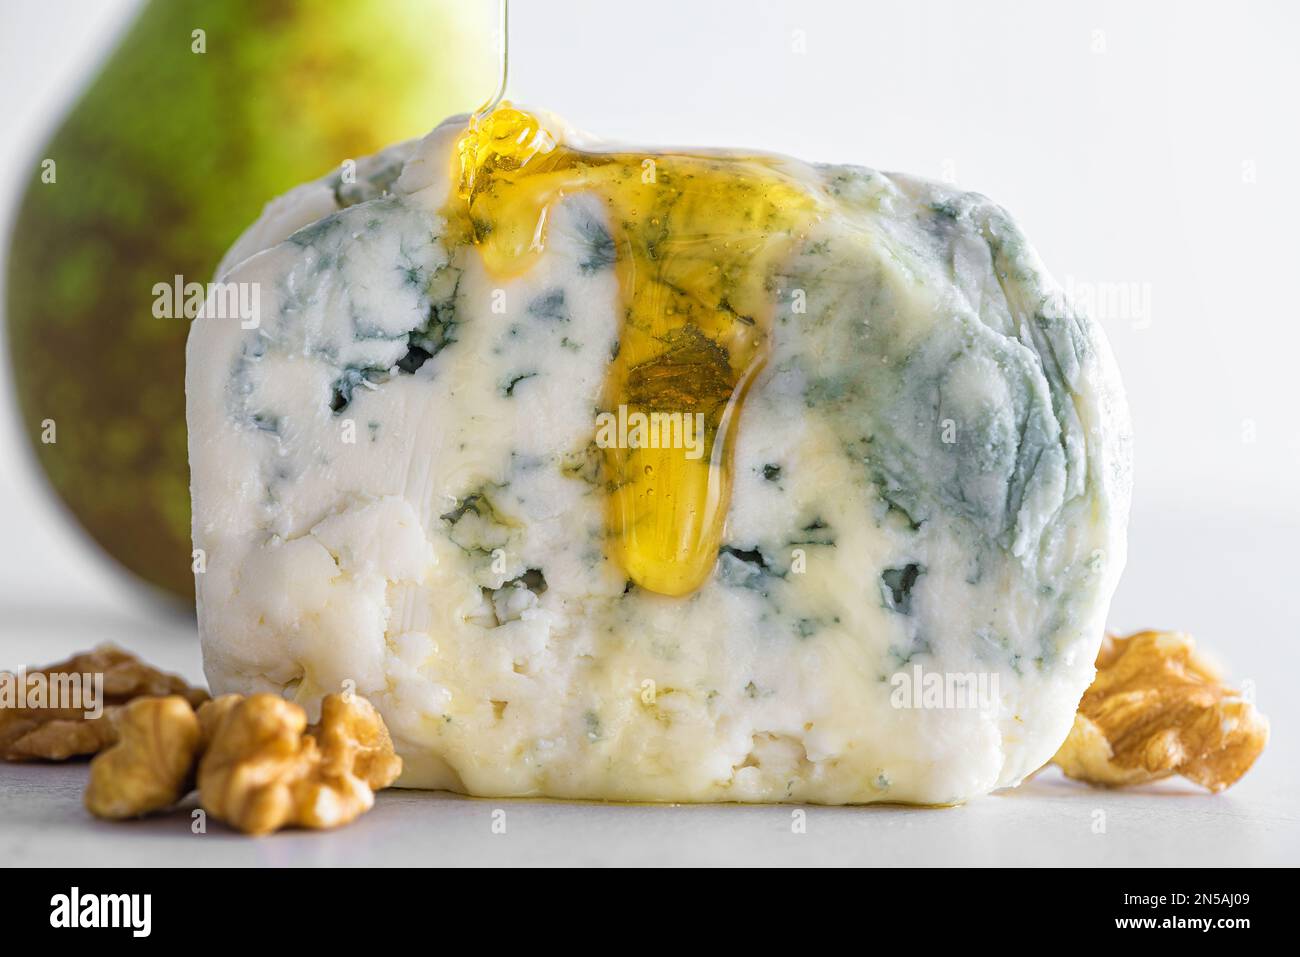 Pouring honey on blue cheese dorblu or gorgonzola with pear and walnuts on white background. Close up. Tasty food Stock Photo